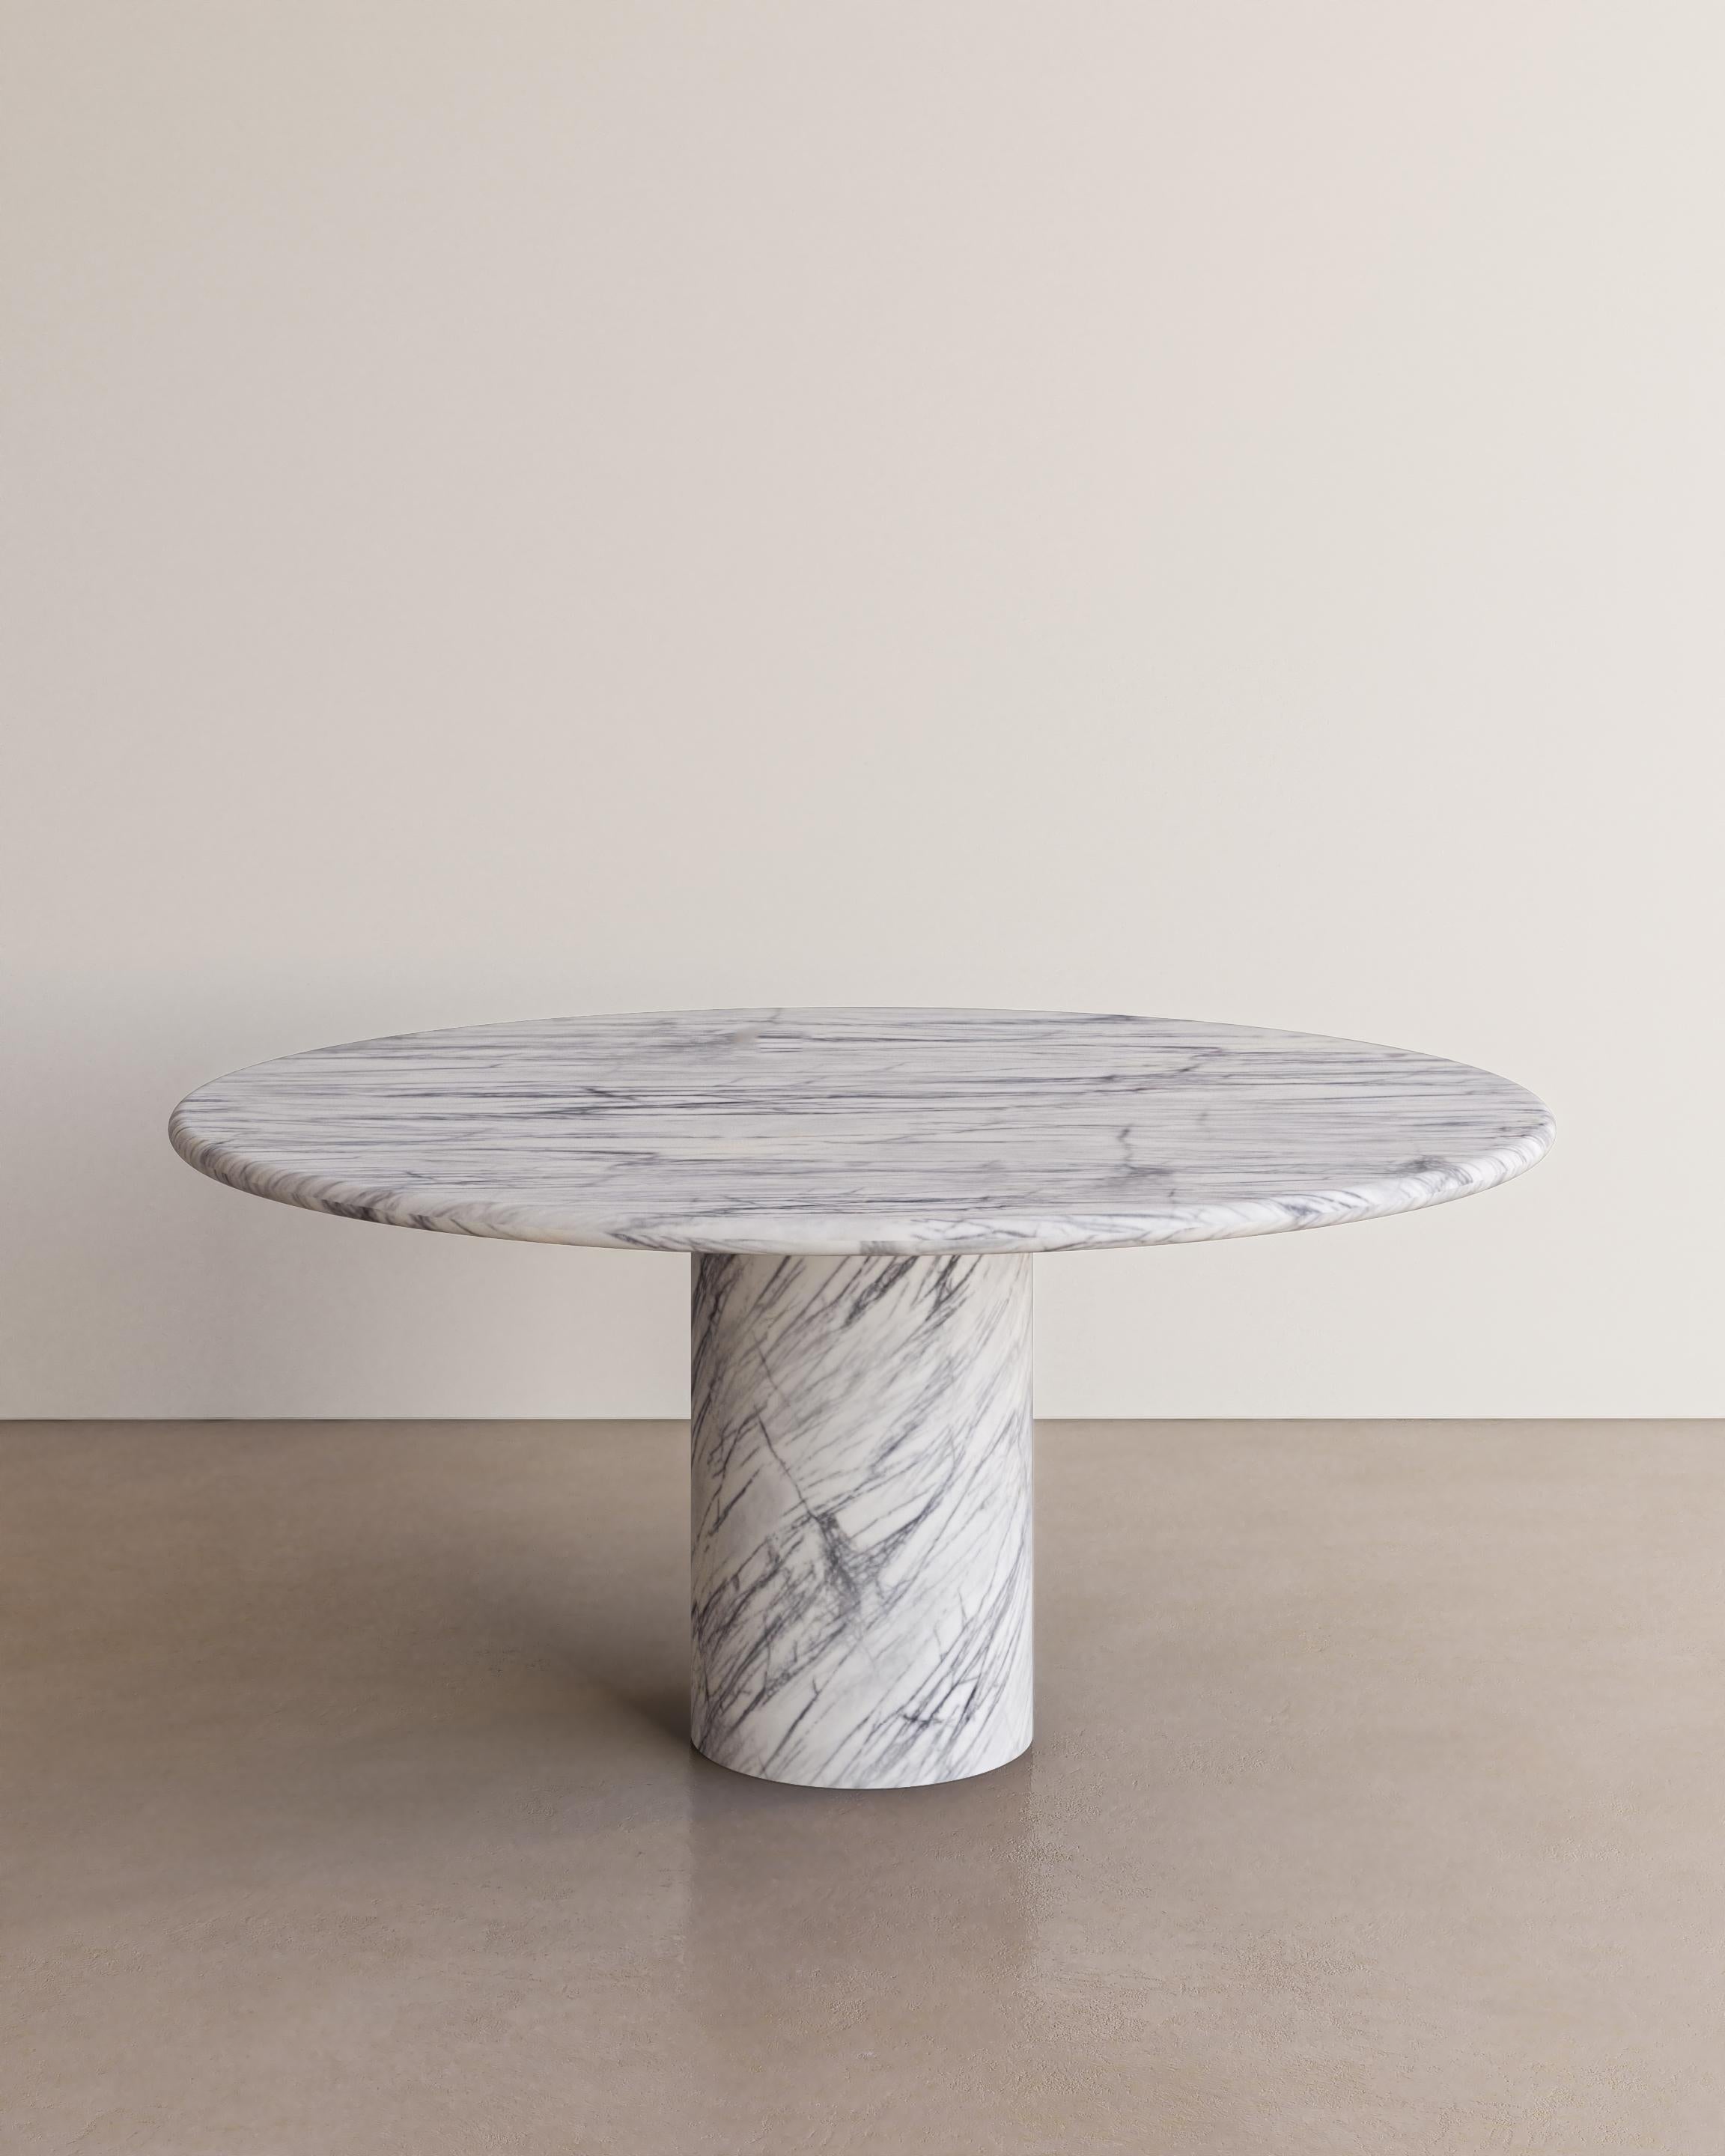 La Mer Quartzite Voyage Dining Table i by the Essentialist For Sale 5